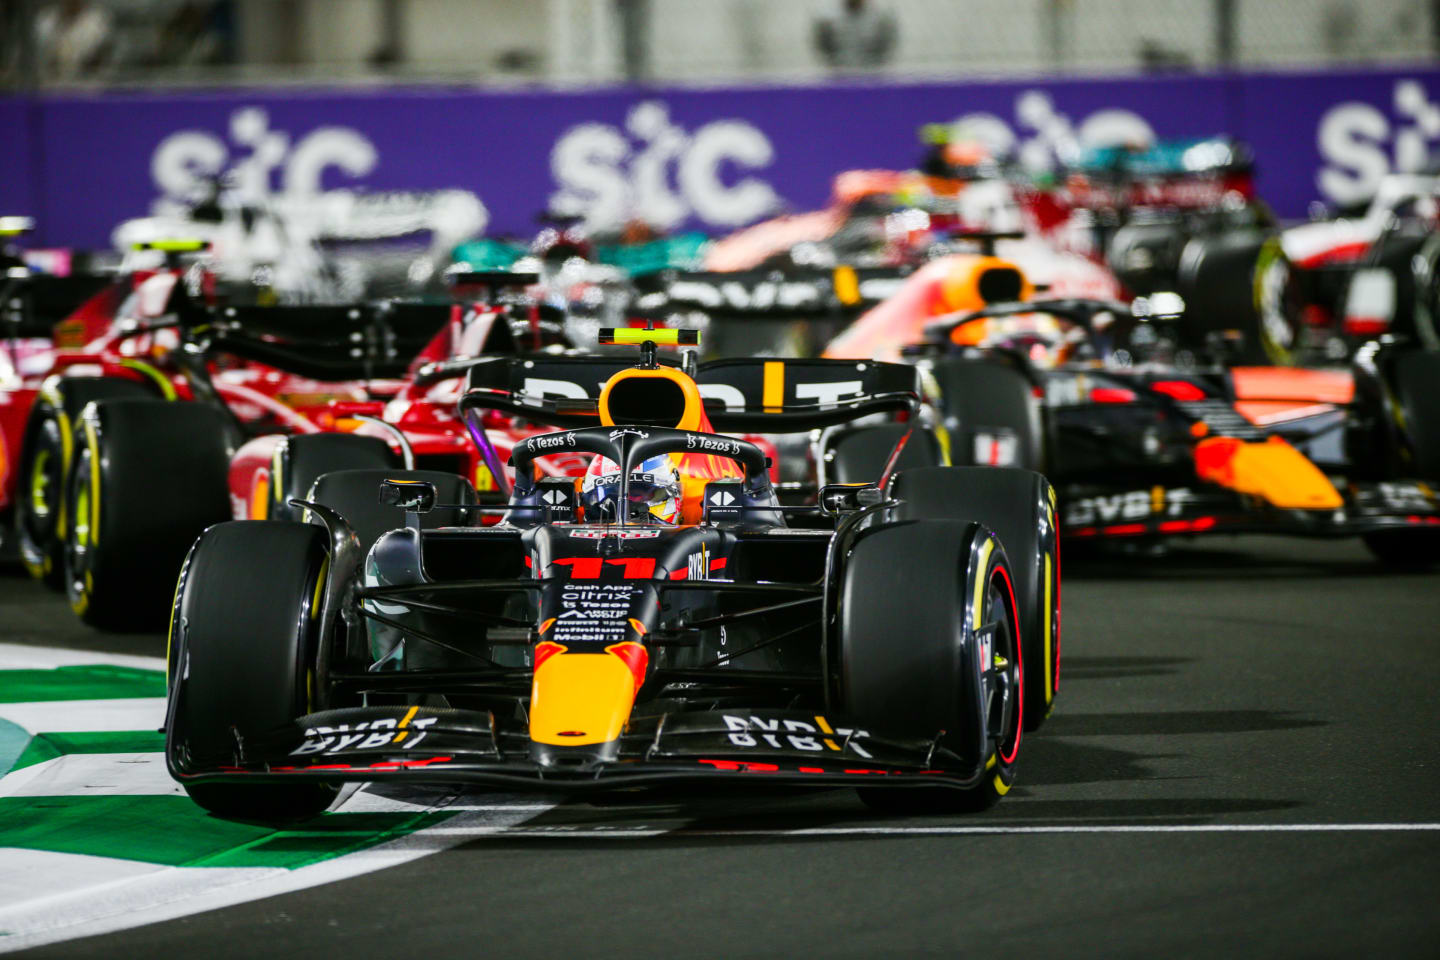 JEDDAH, SAUDI ARABIA - MARCH 27: Sergio Perez of Mexico and Red Bull Racing leads into the first corner during the F1 Grand Prix of Saudi Arabia at the Jeddah Corniche Circuit on March 27, 2022 in Jeddah, Saudi Arabia. (Photo by Peter Fox/Getty Images)